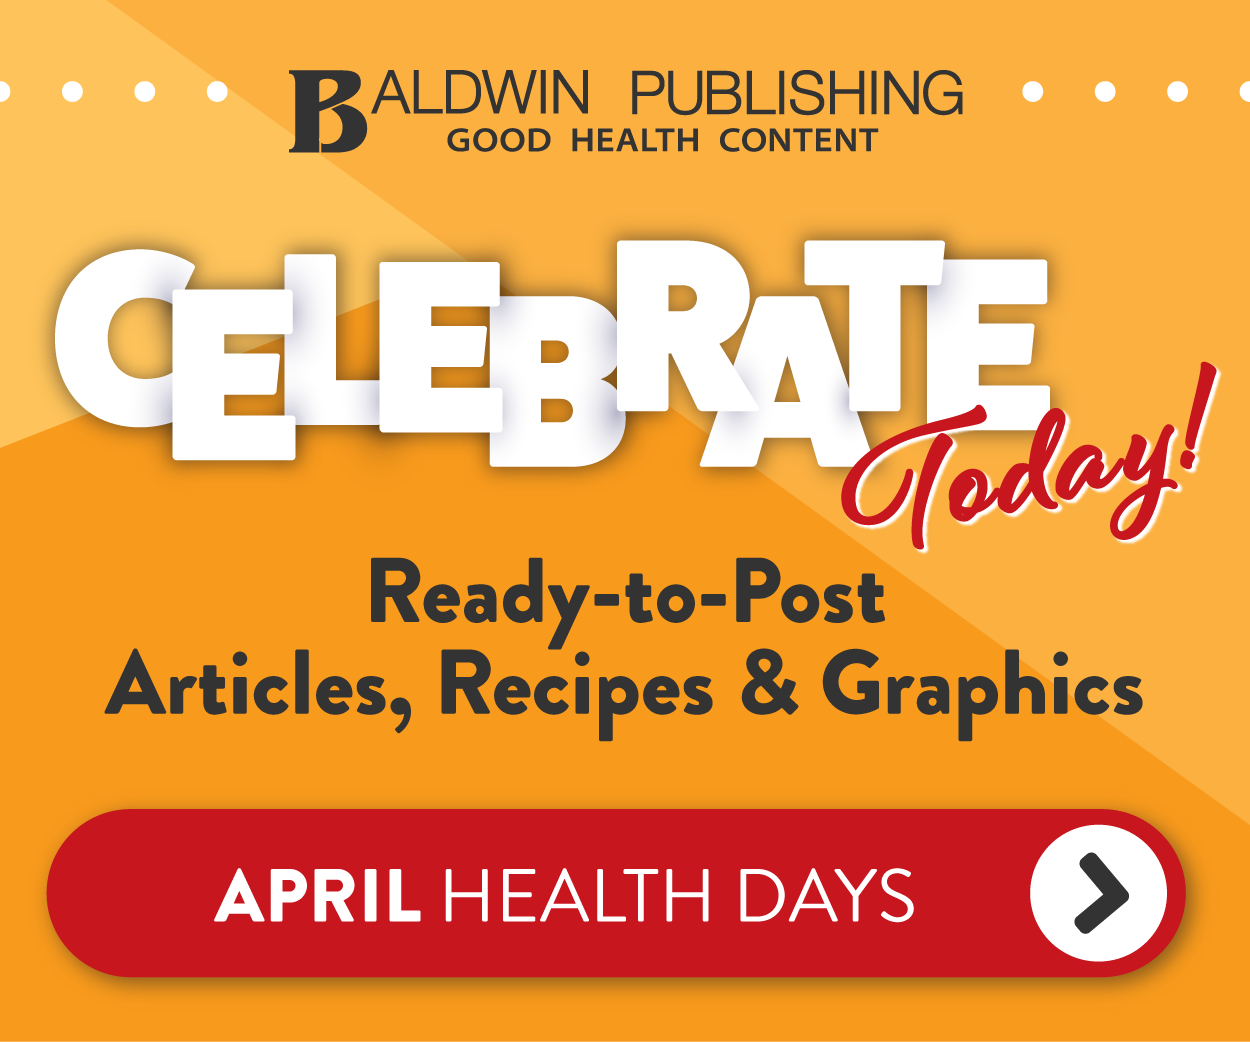 Baldwin Publishing - Celebrate Today, See All April Health Days